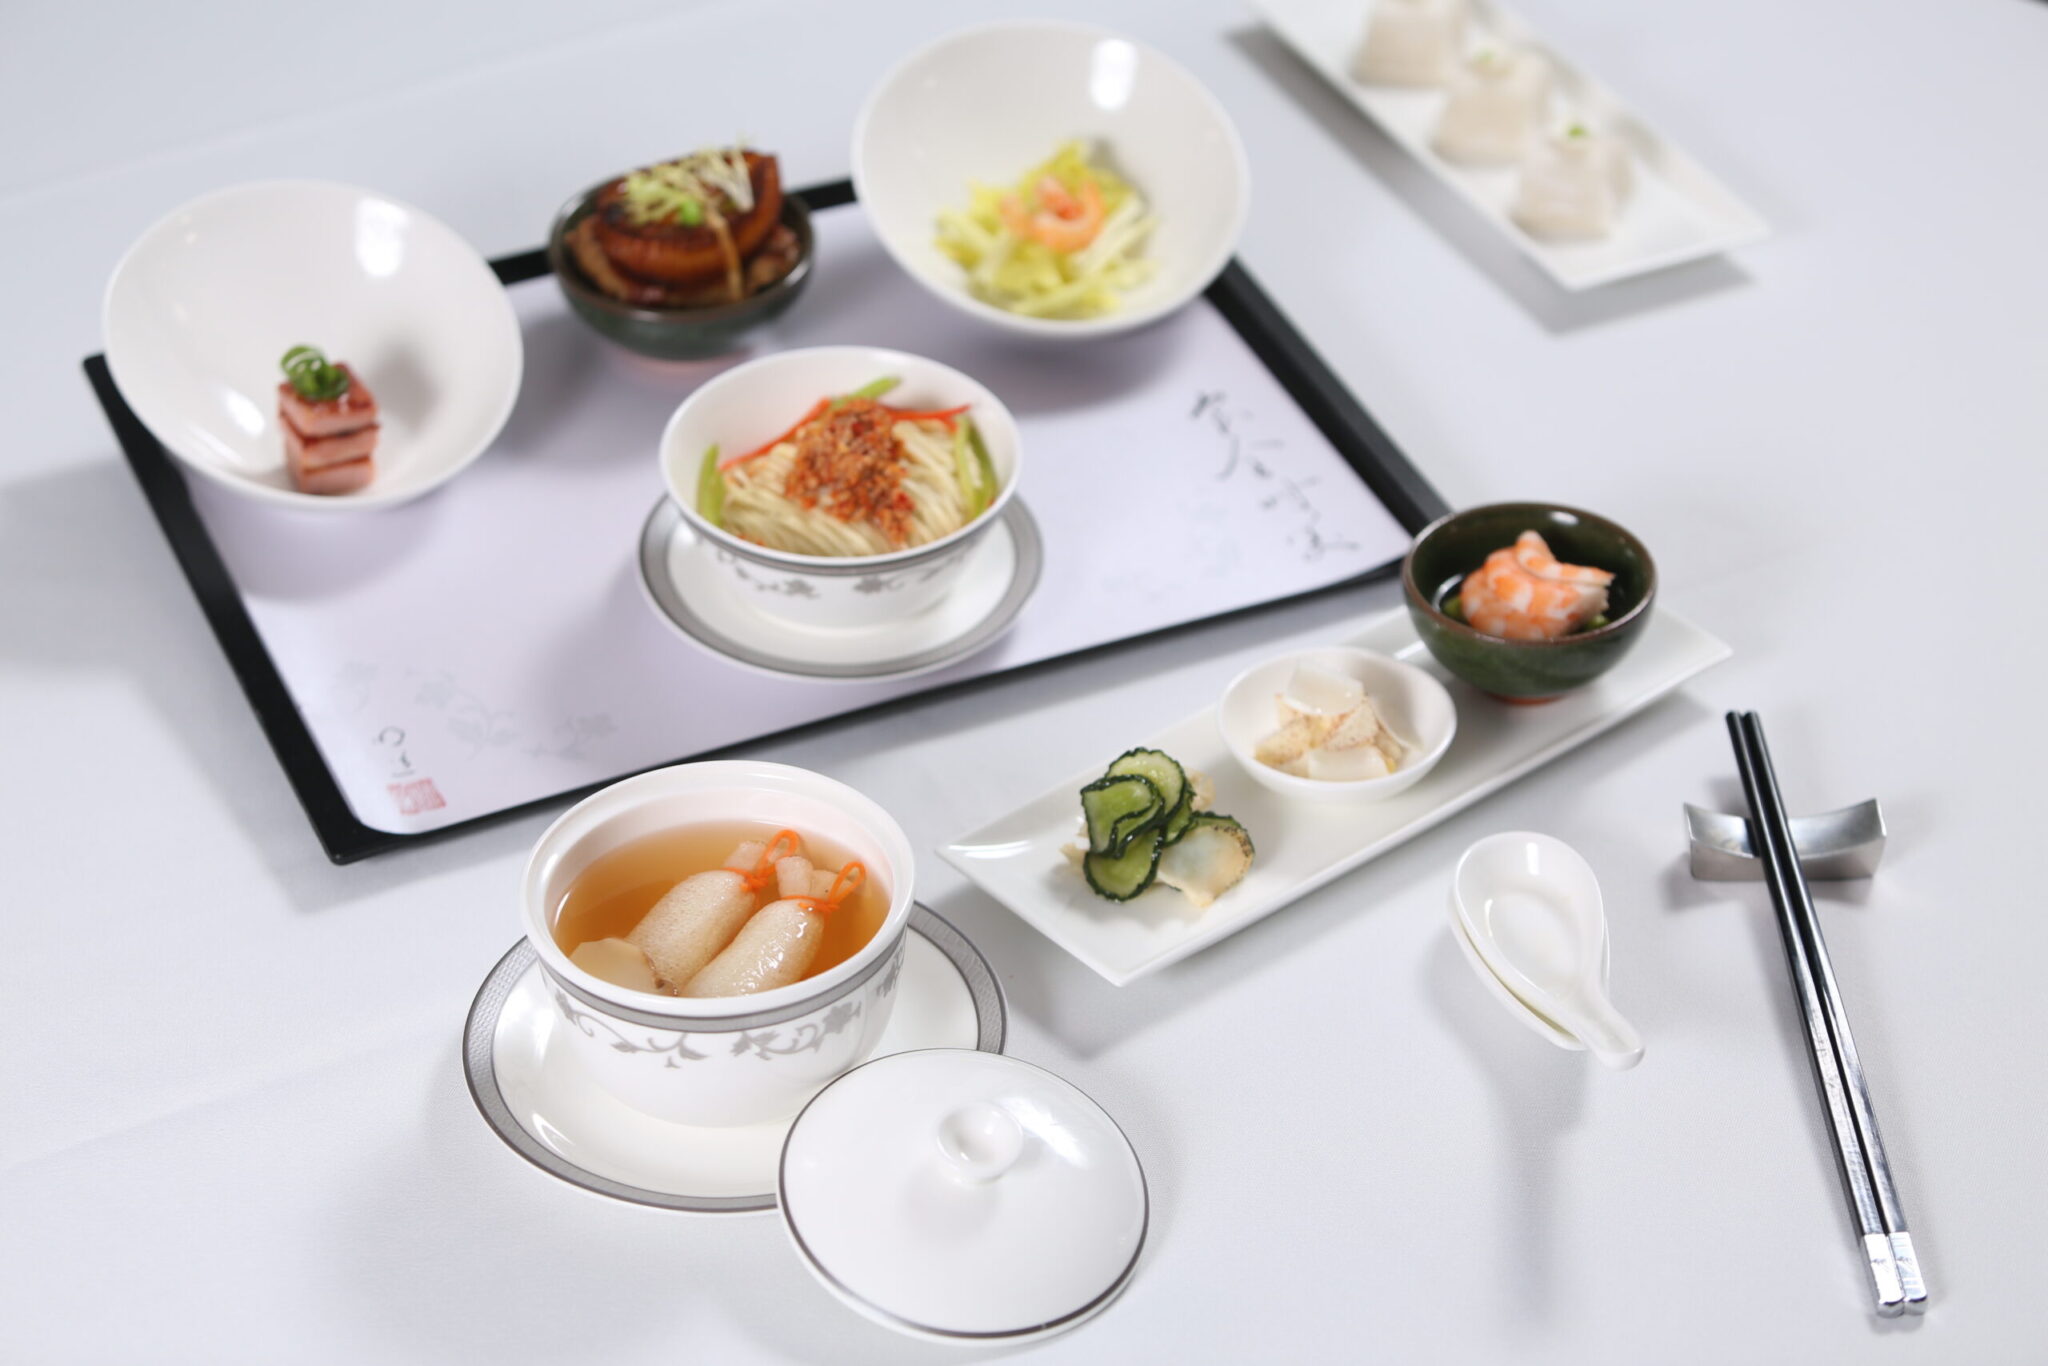 Singapore Airlines - First Class Meal Spread